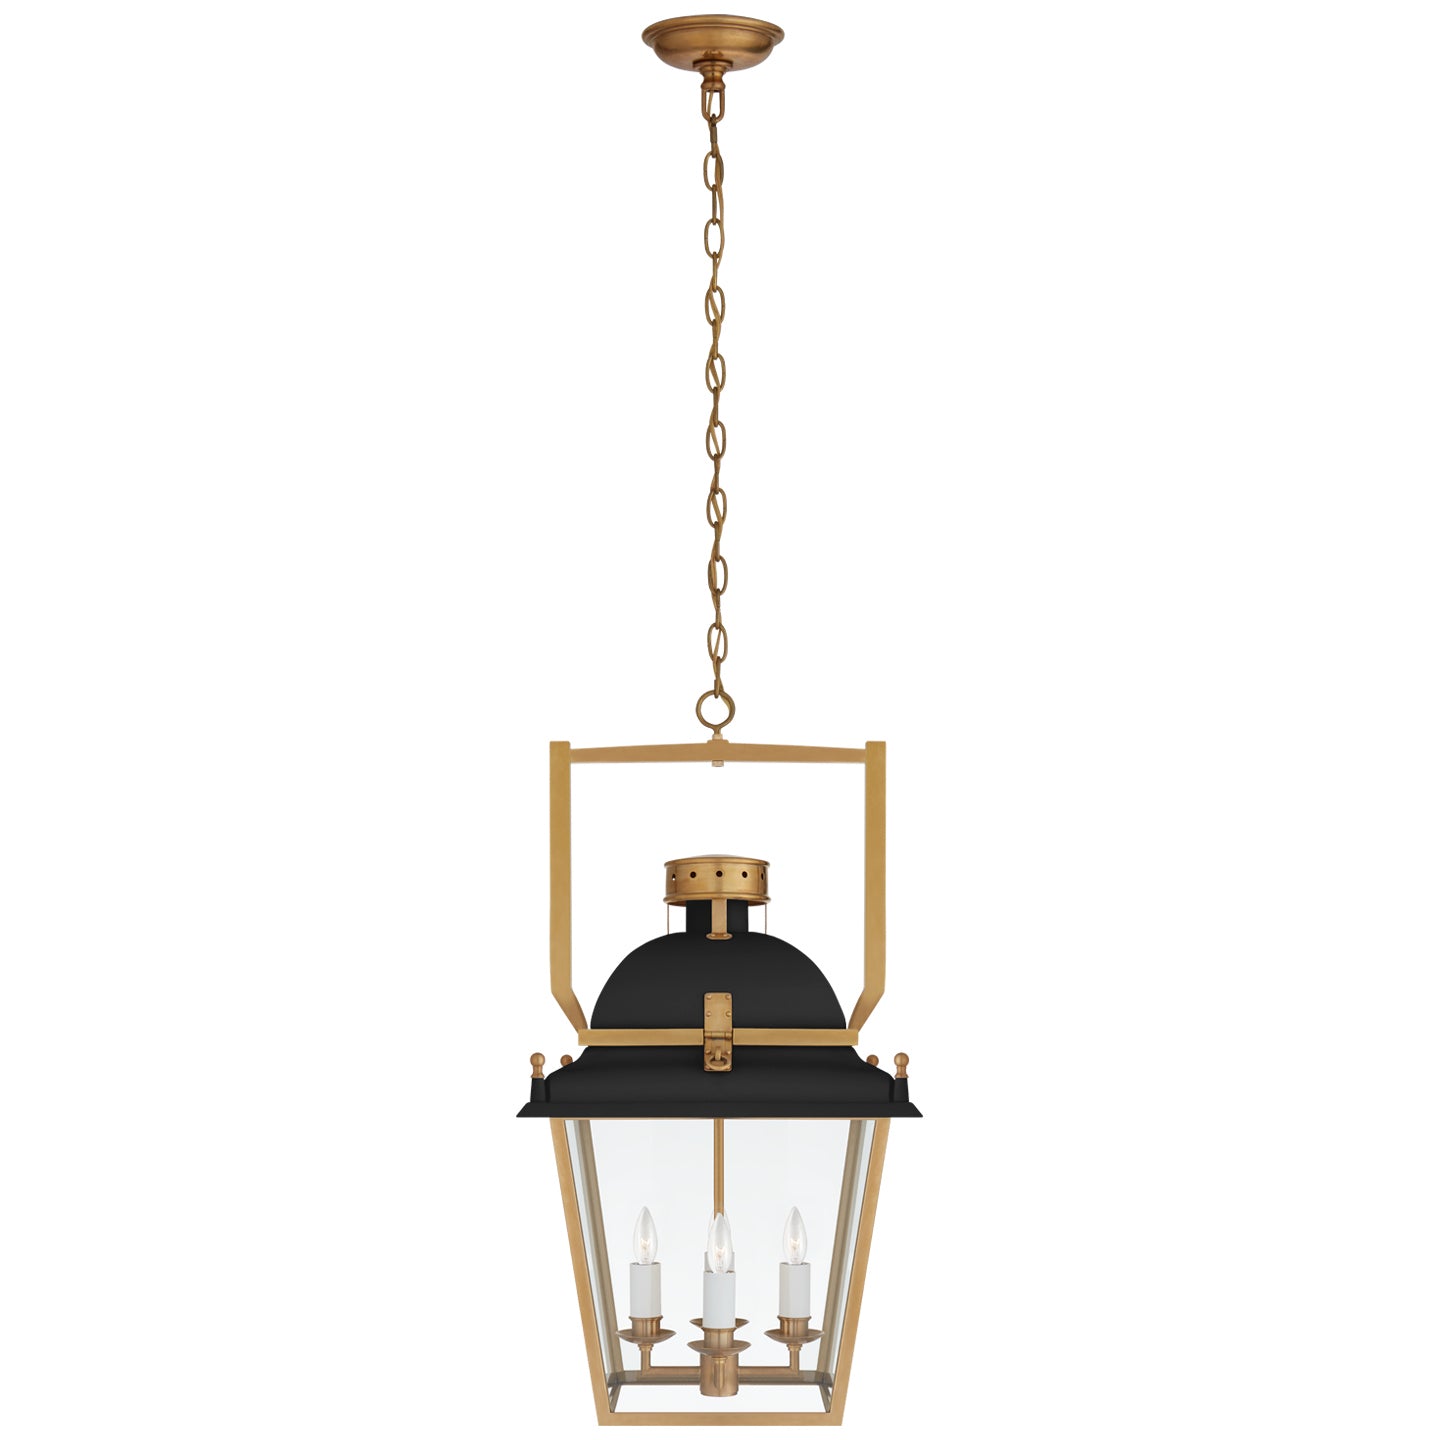 Load image into Gallery viewer, Visual Comfort Signature - CHC 5108BLK/AB-CG - Four Light Lantern - Coventry - Matte Black and Antique-Burnished Brass
